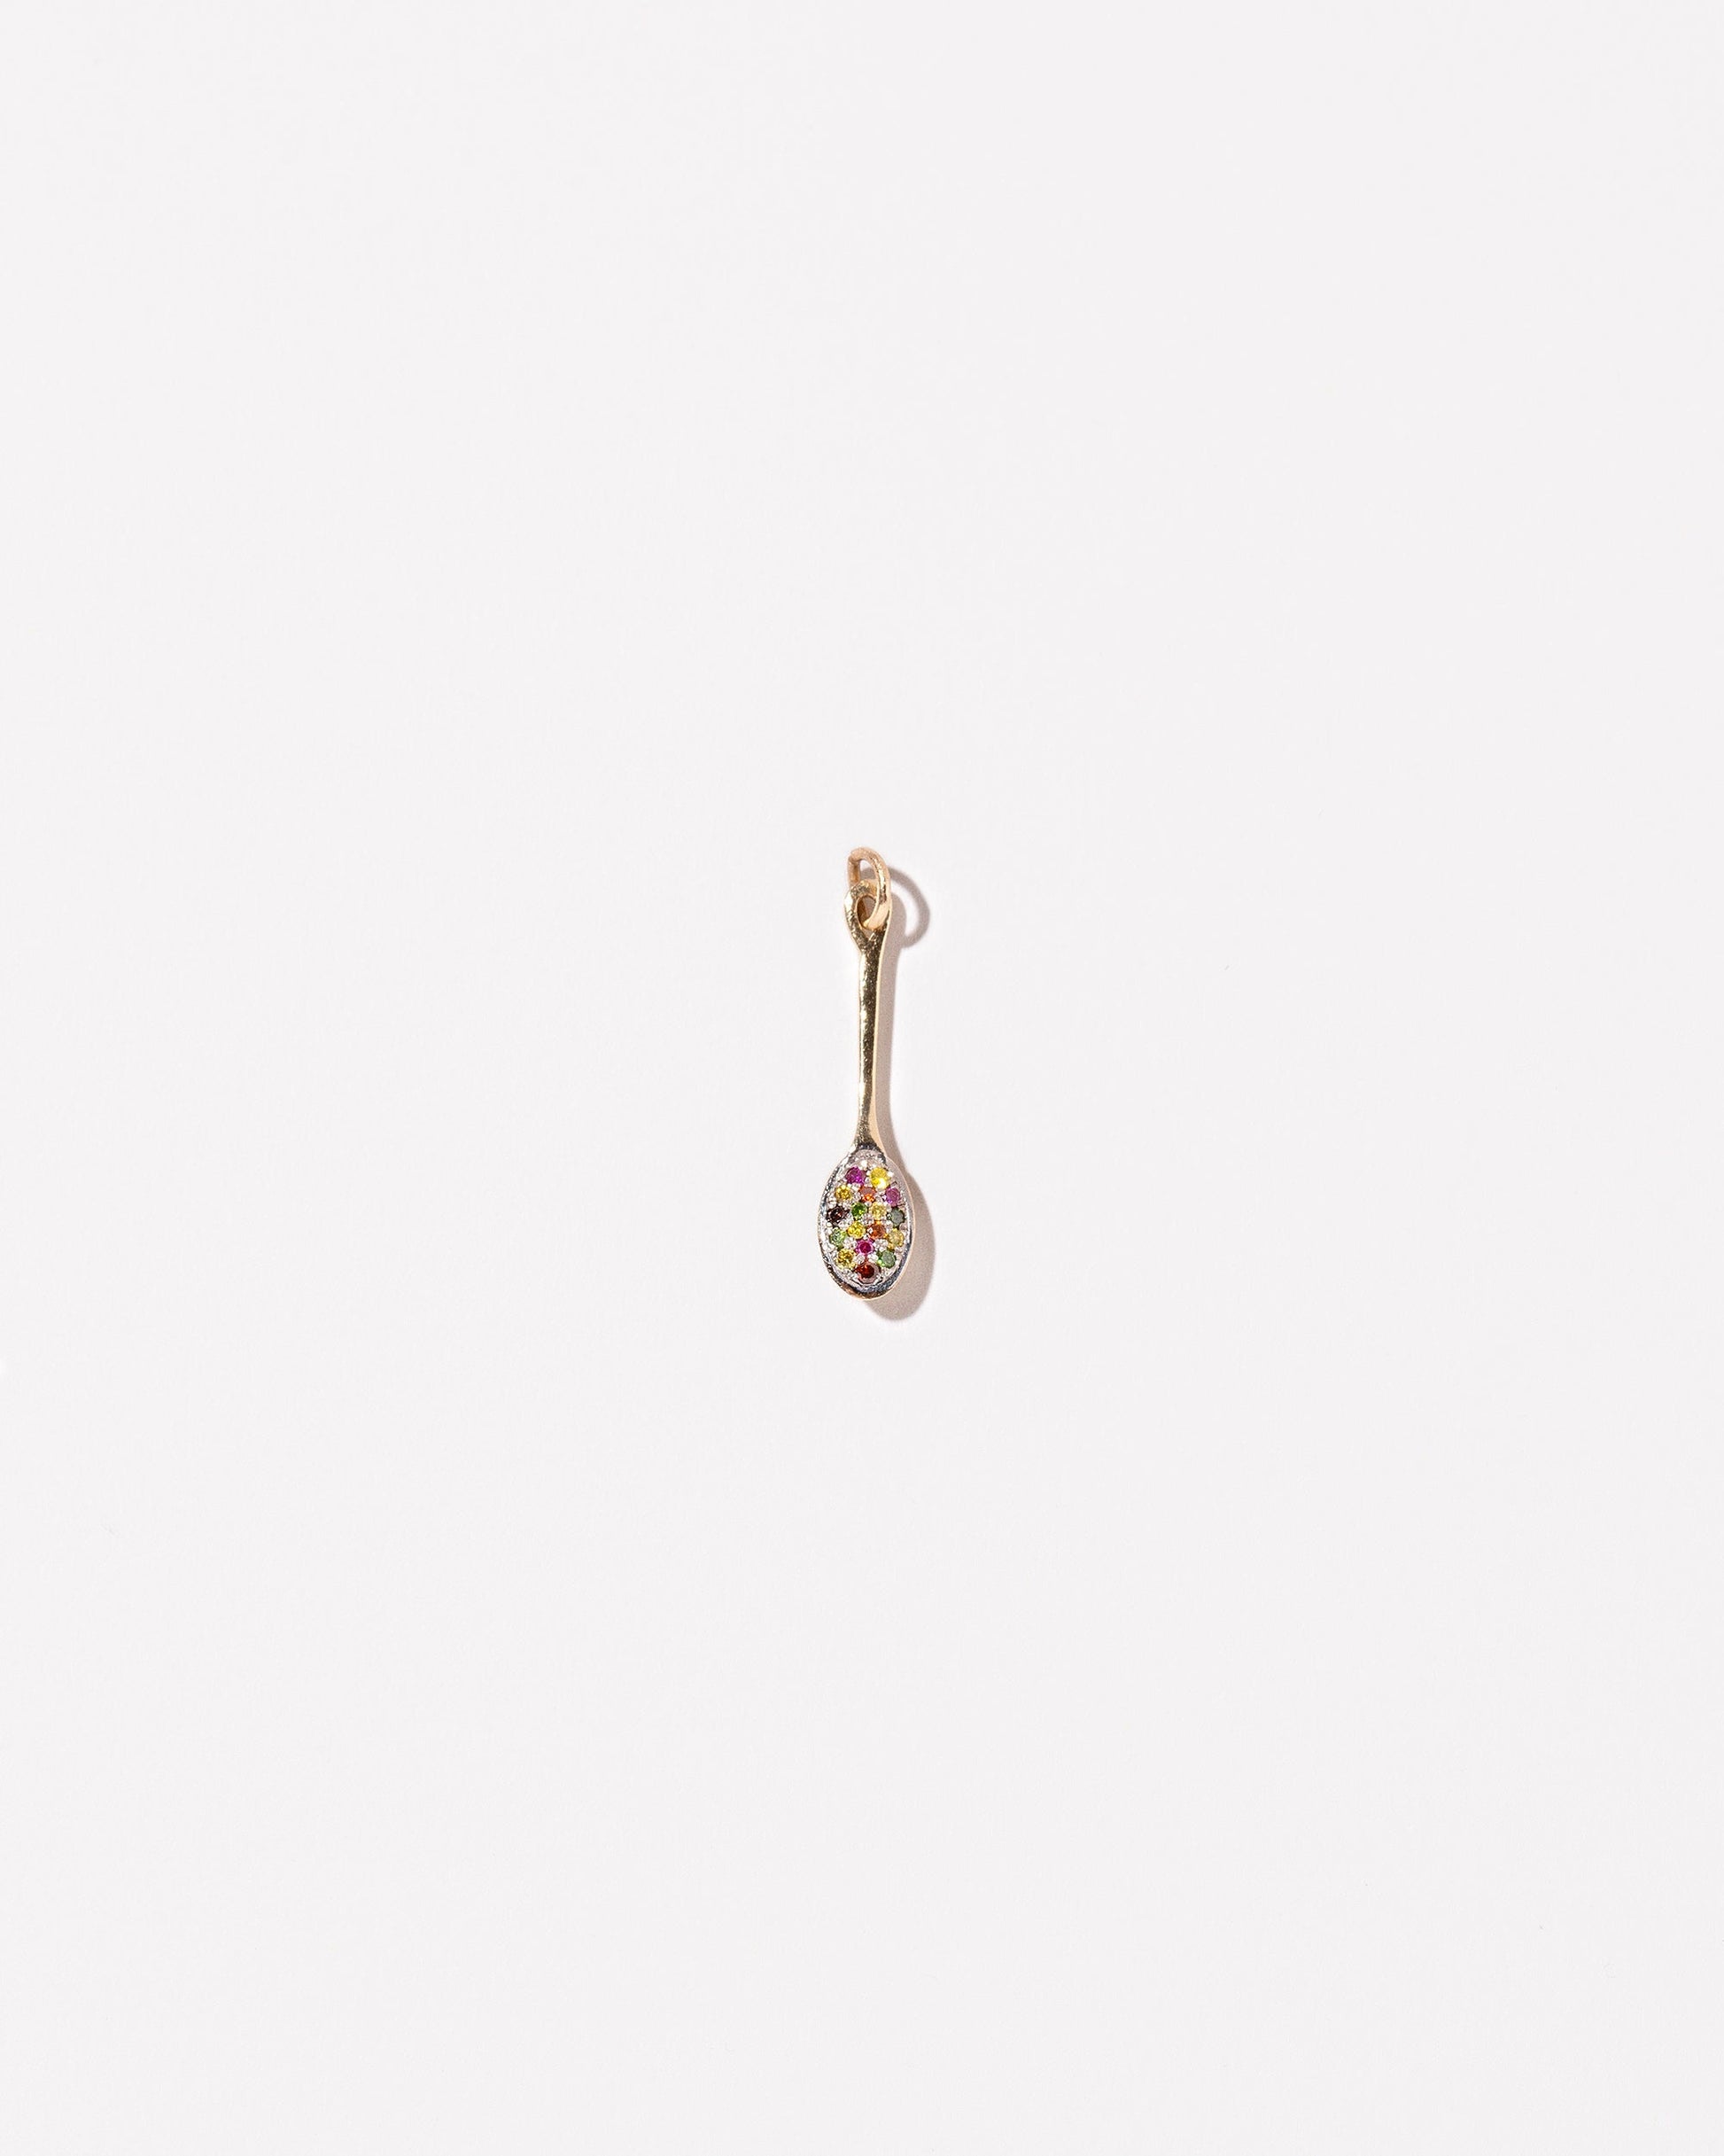  Cereal Spoon Charm on light color background.